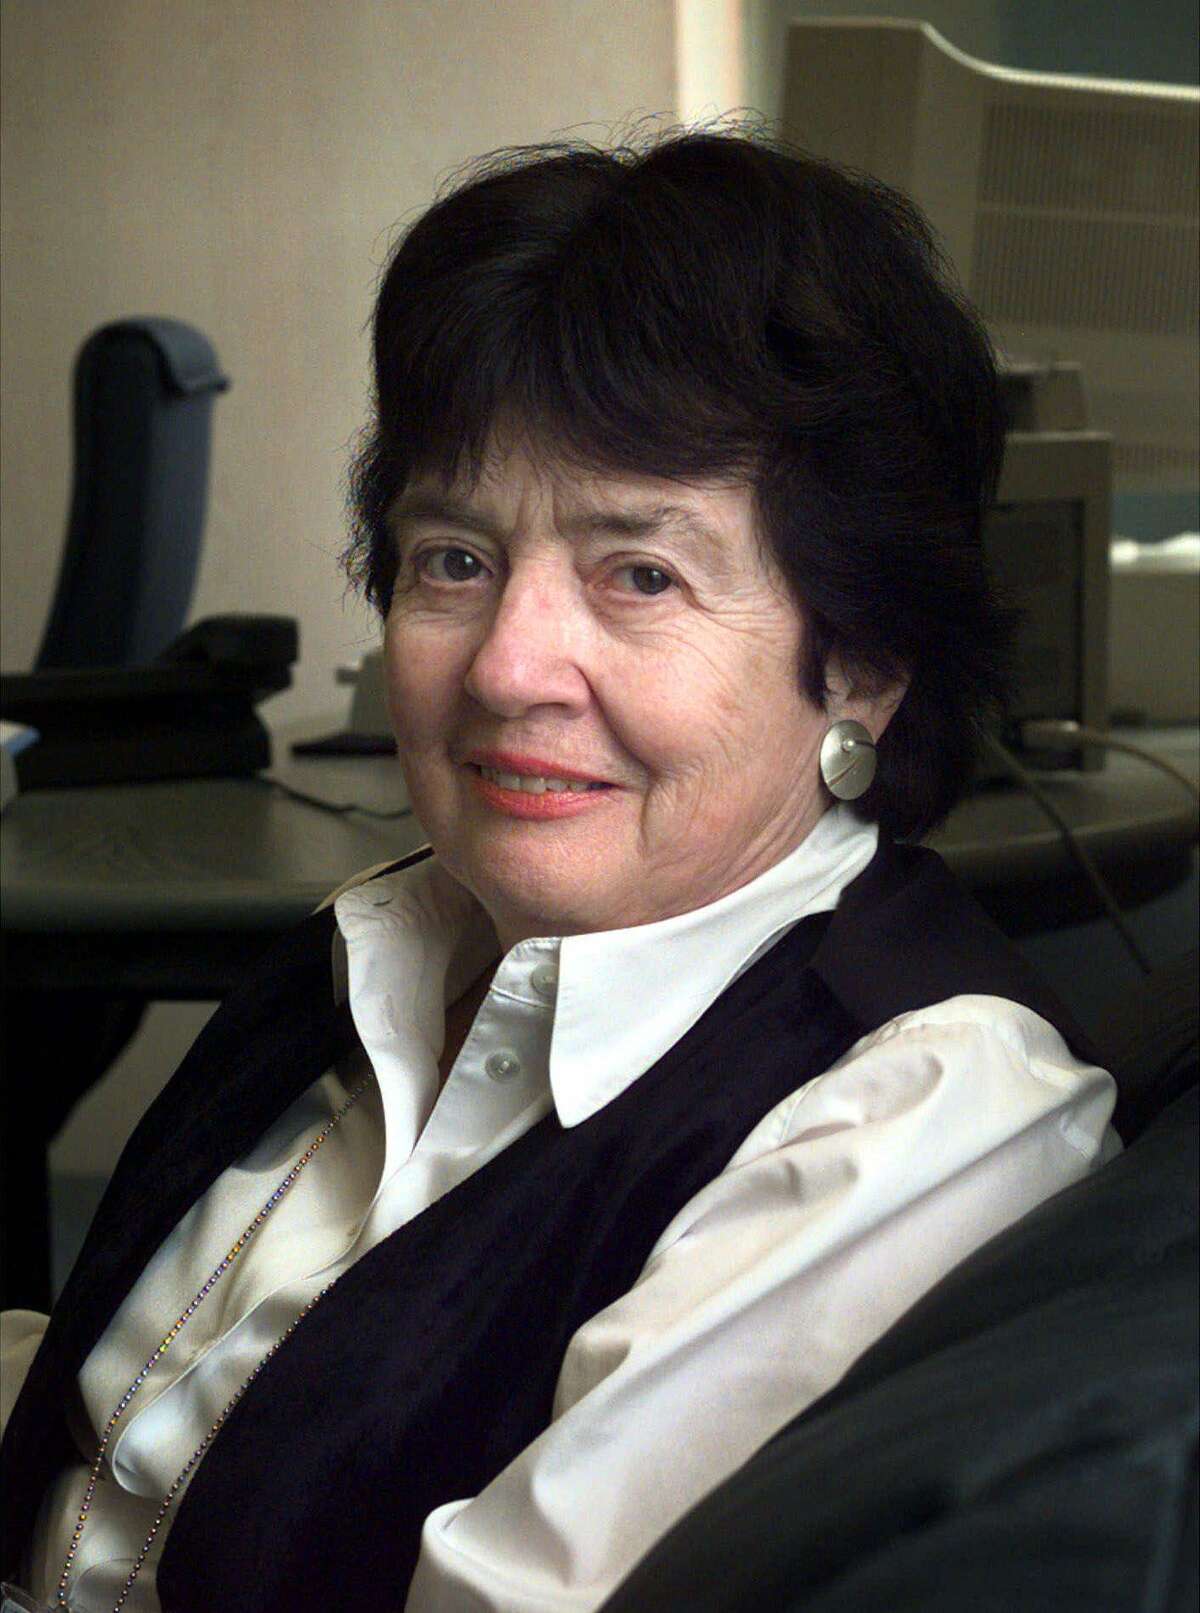 FILE This Feb. 15, 2000 file photo shows Judge Patricia Wald in The Hague. President Barack Obama will bestow the nation's highest civilian honor on Oprah Winfrey and former President Bill Clinton later this year. Clinton and Winfrey will receive the Presidential Medal of Freedom at the White House along with 14 others, including former Sen. Richard Lugar and women's rights activist Gloria Steinem. (AP Photo/Peter Dejong, File)